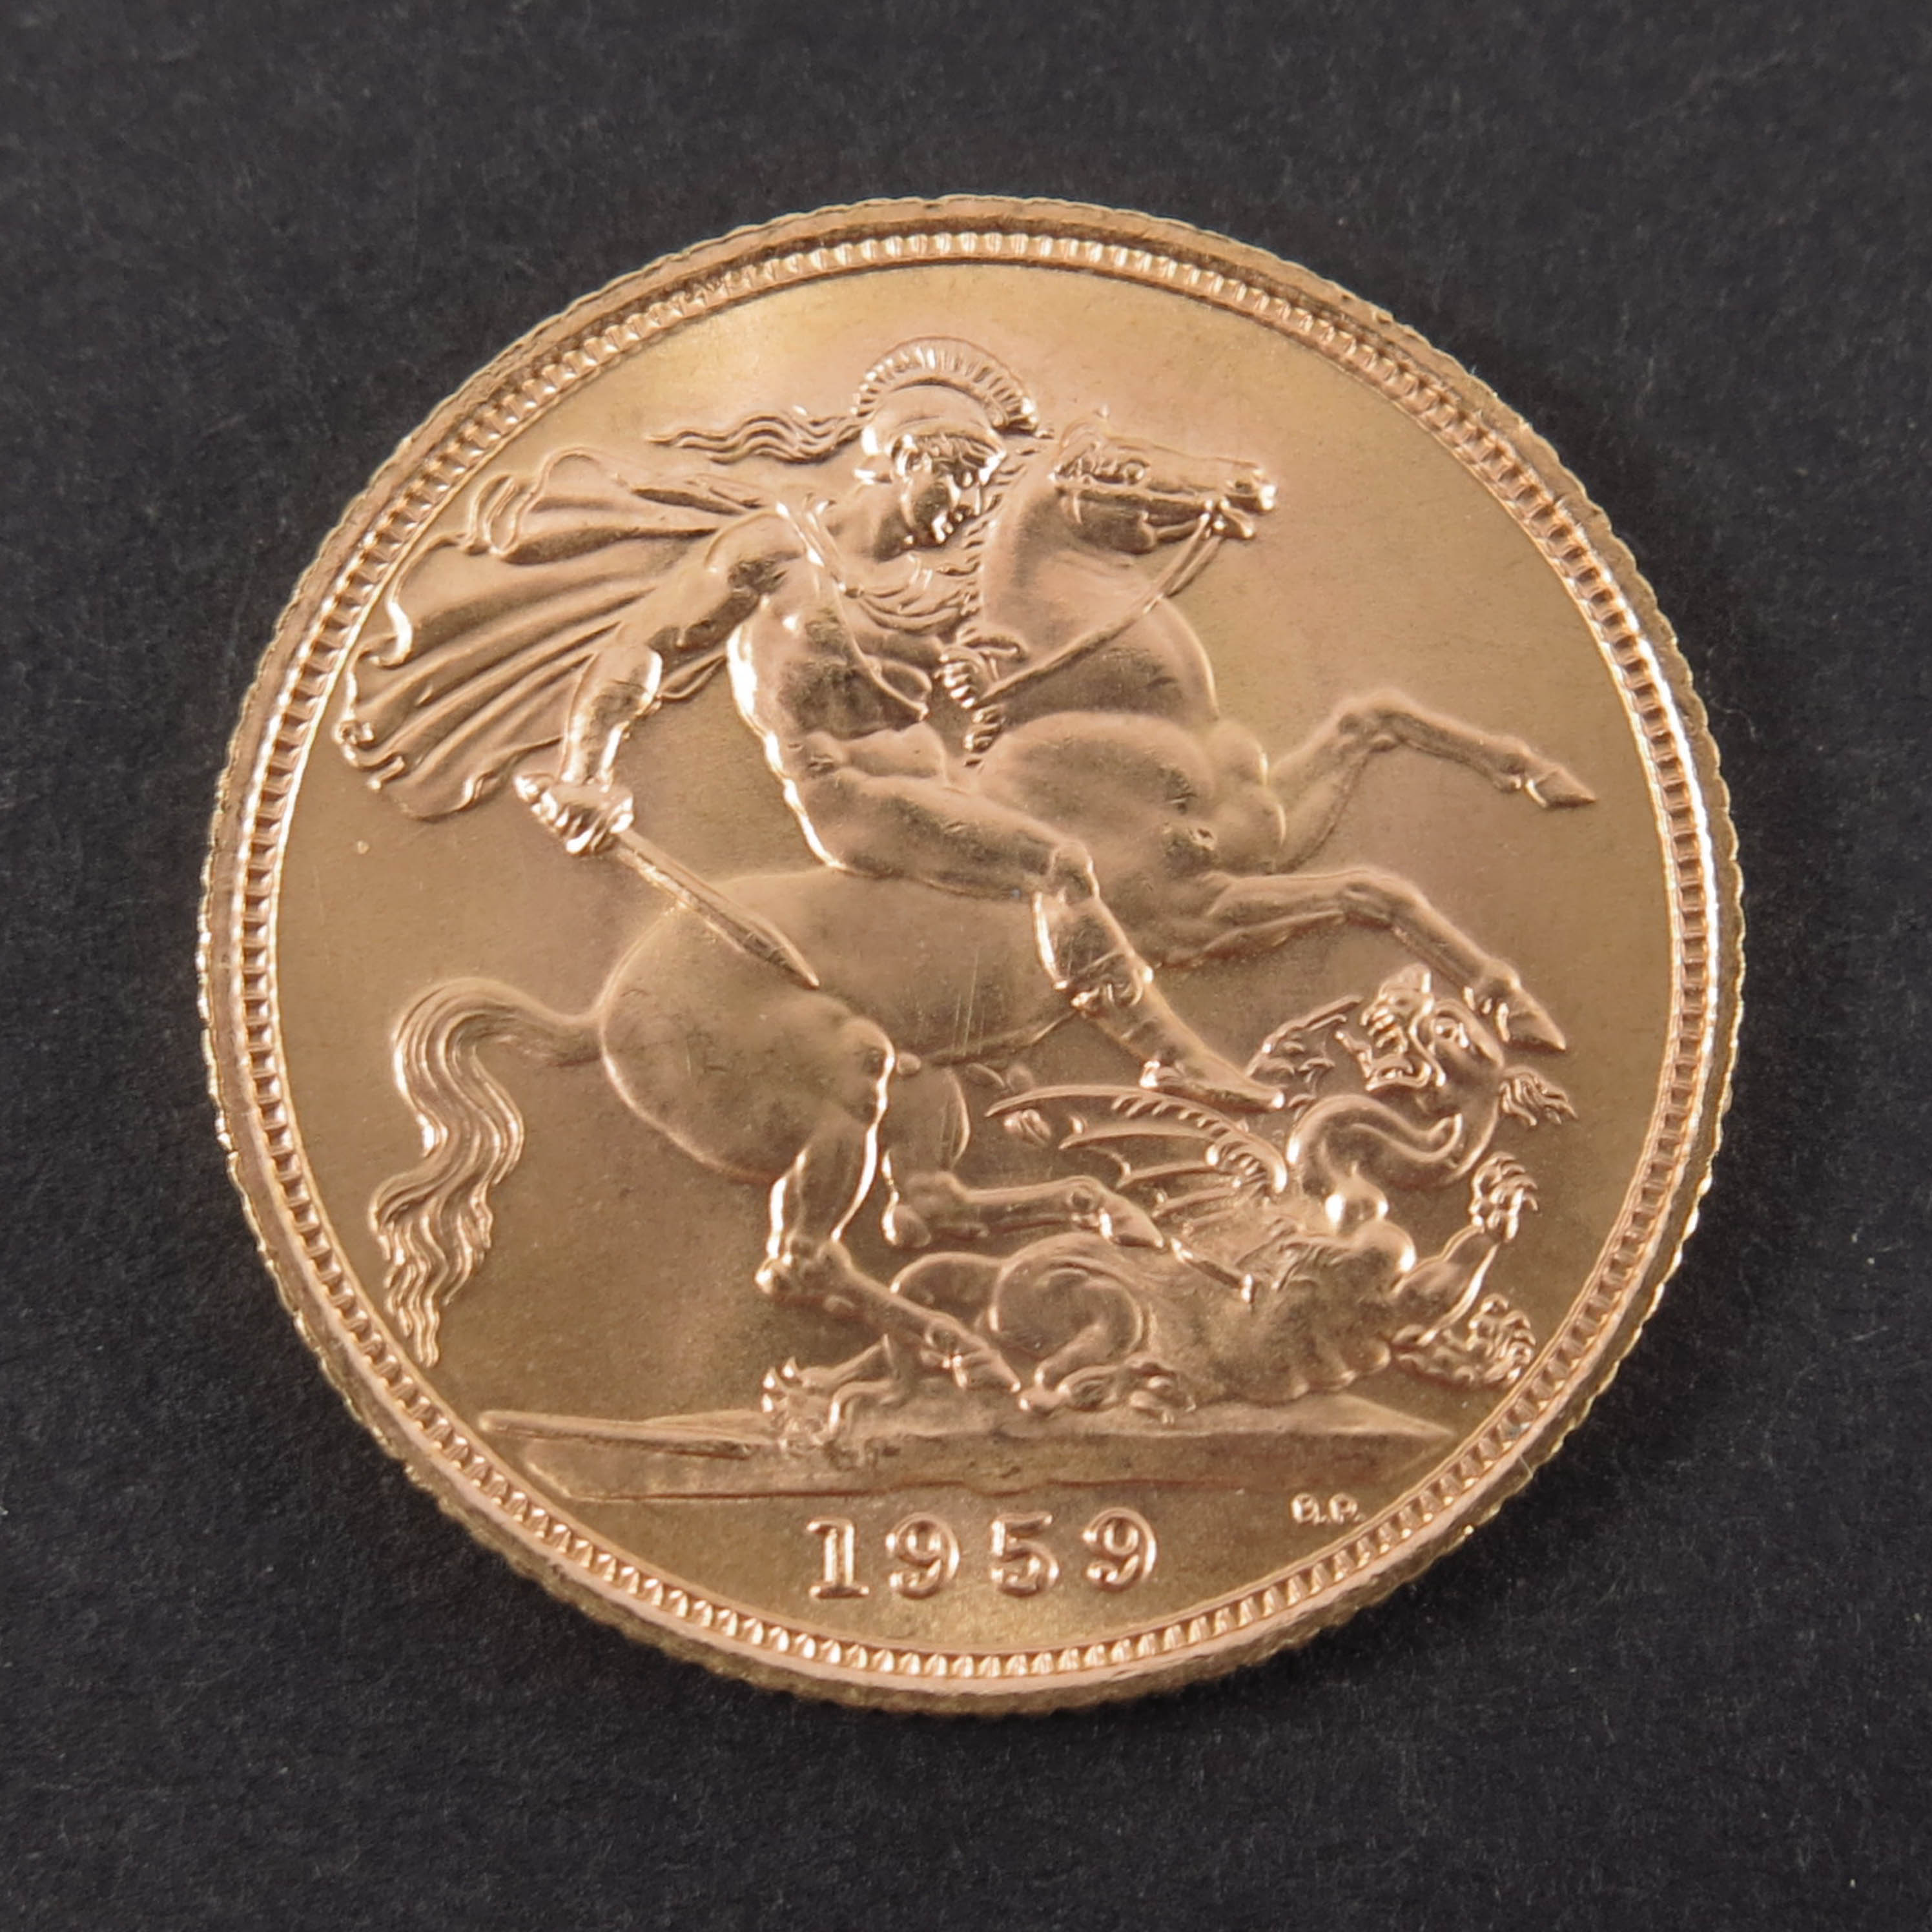 Elizabeth II, gold sovereign coin dated 1959